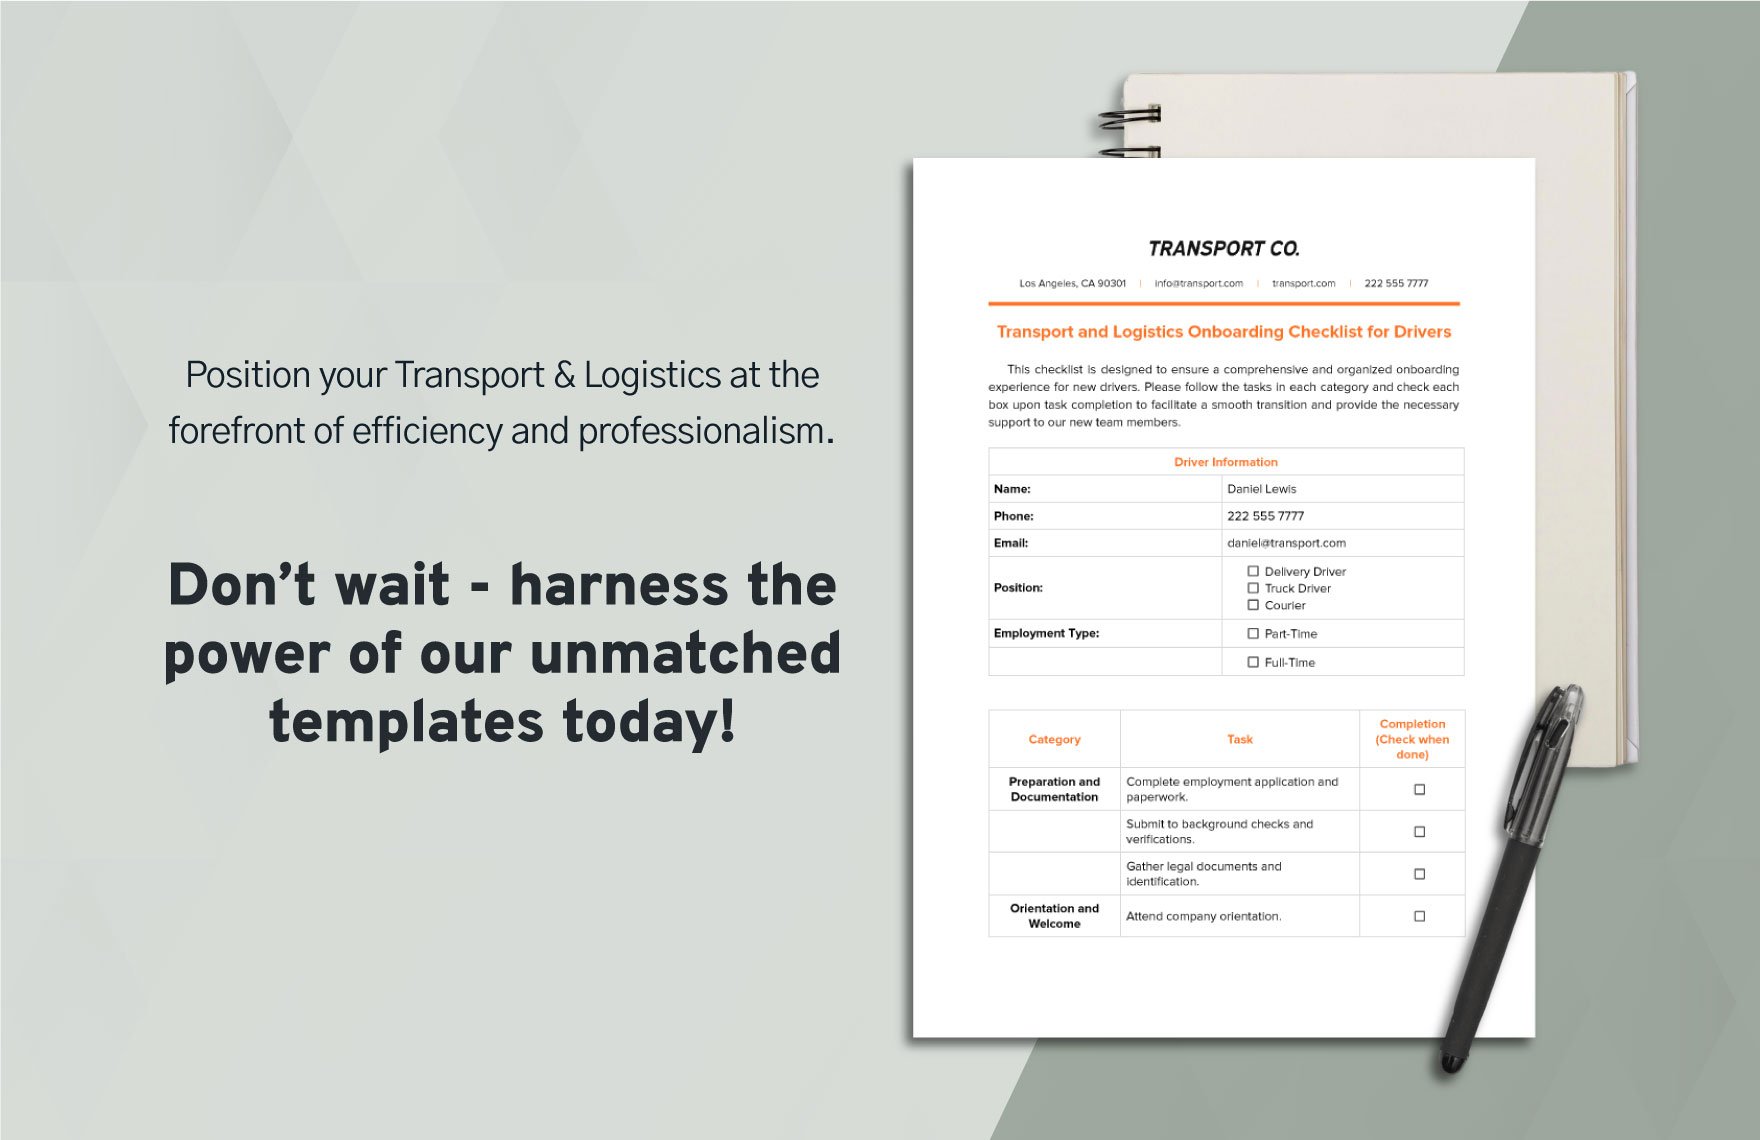 Transport and Logistics Onboarding Checklist for Drivers Template